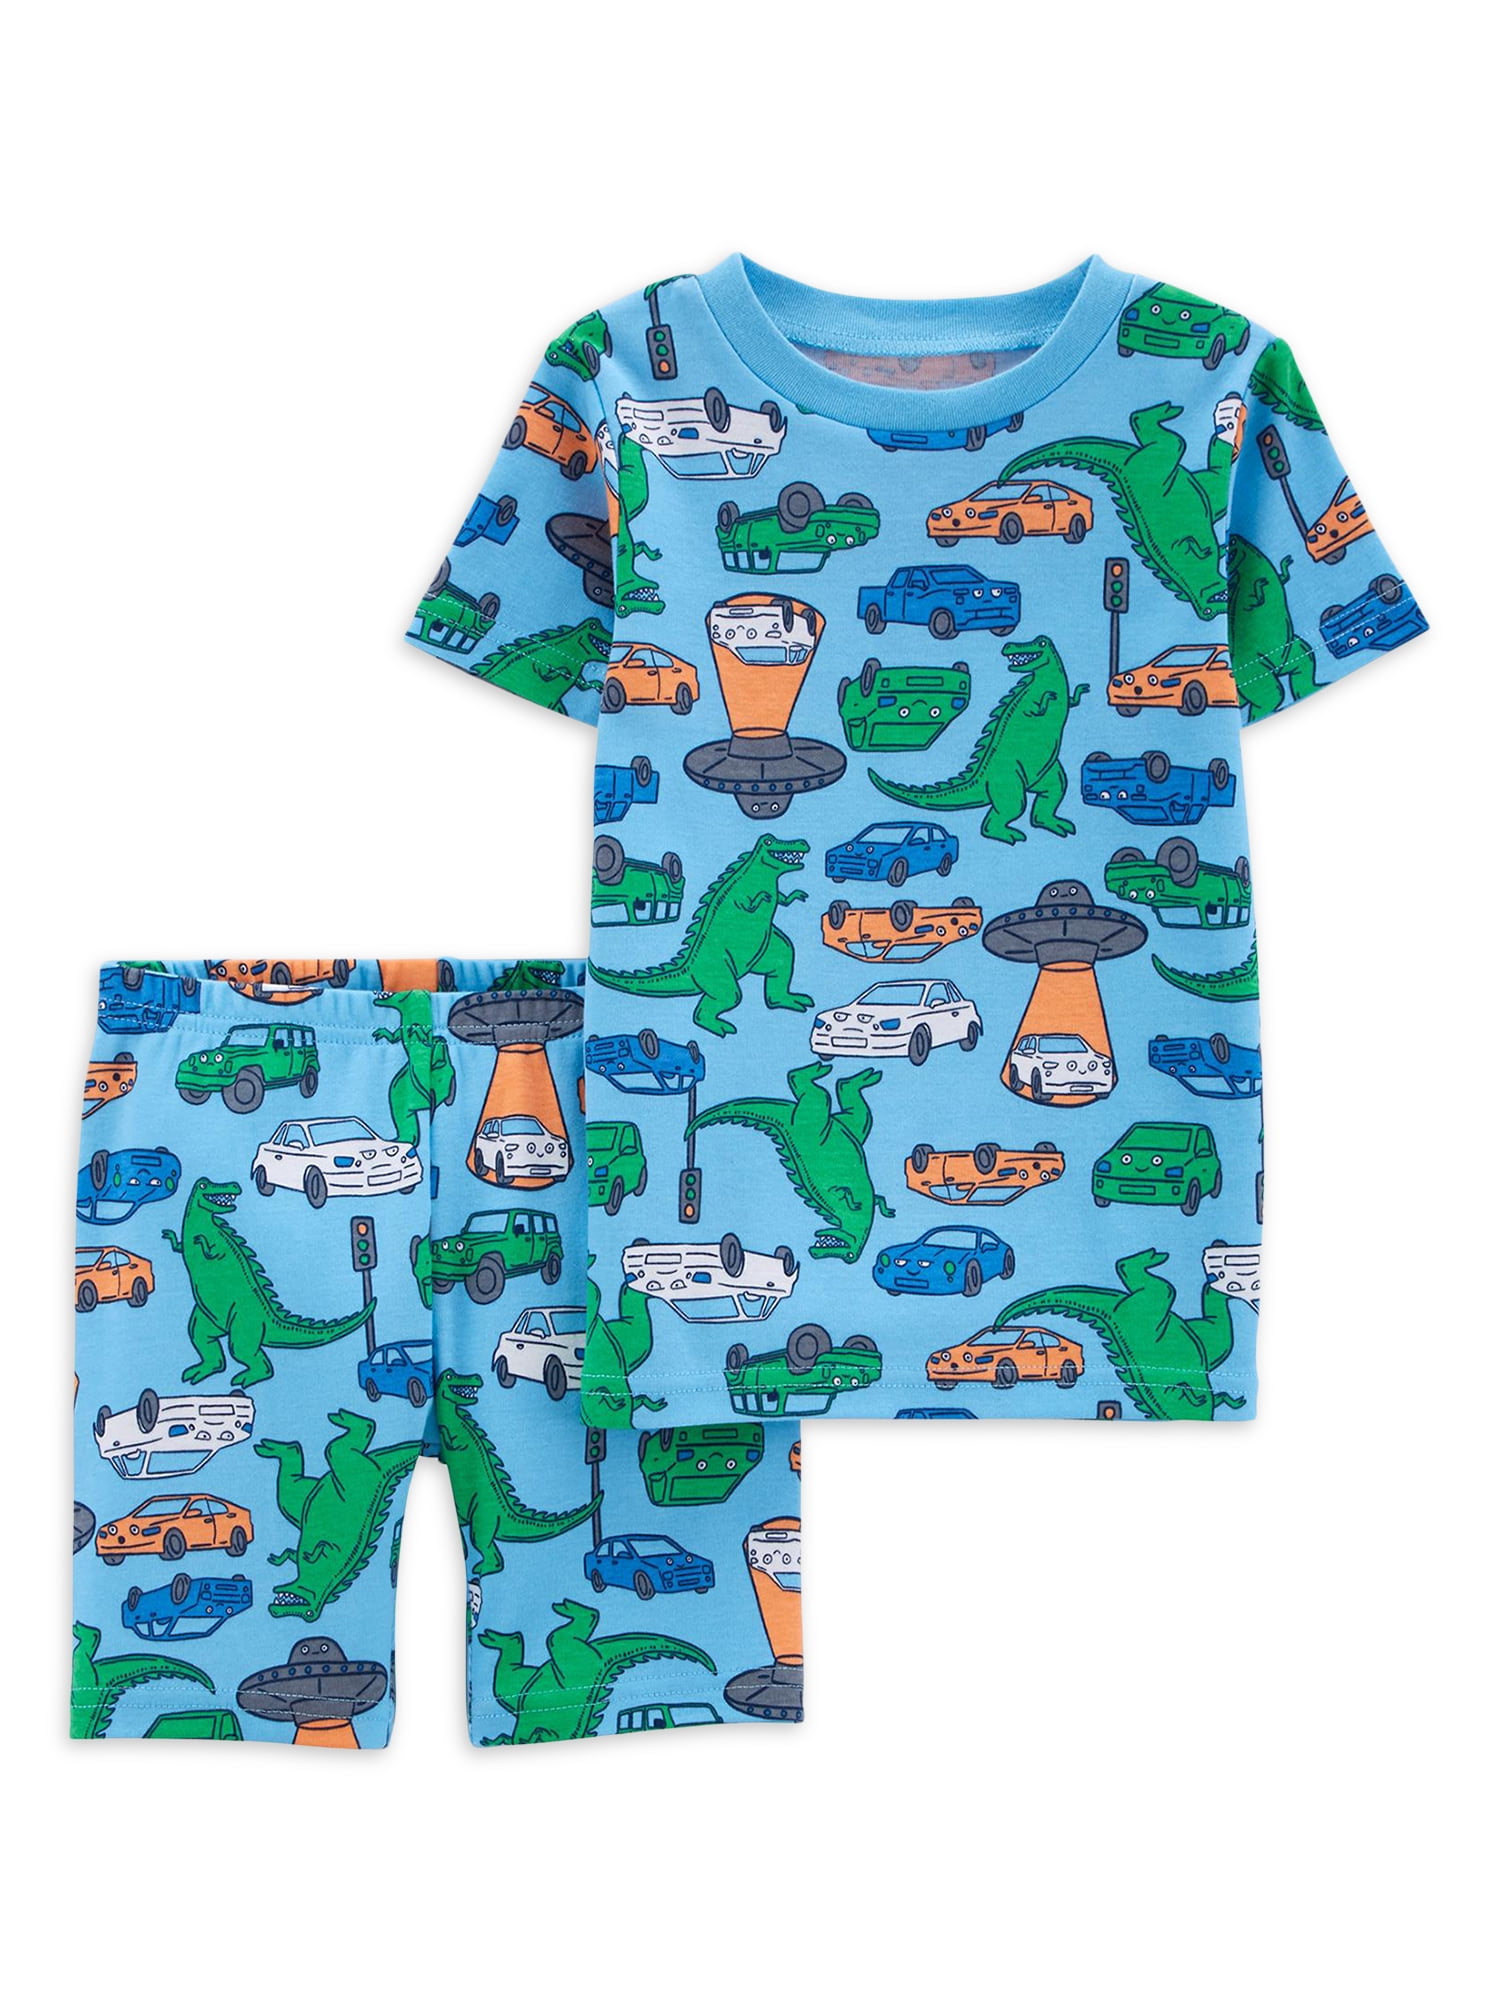 Carter's Child of Mine Toddler Boy Cotton Top and Shorts Pajama Set, 2-Piece, Sizes 12M-5T